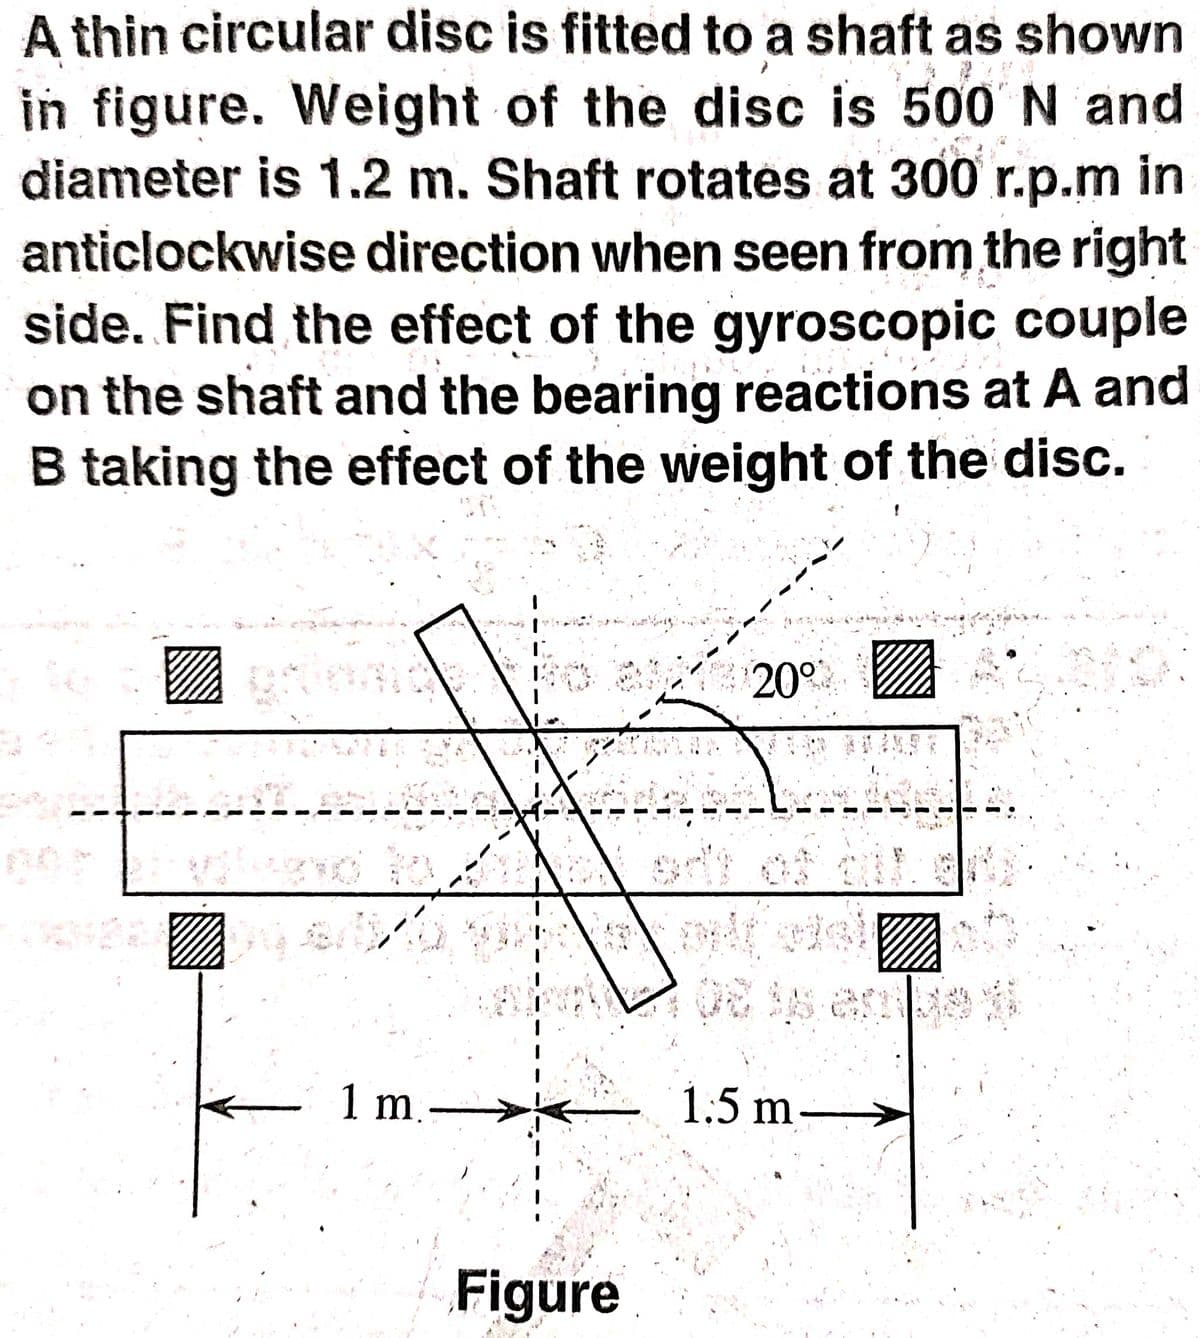 A thin circular disc is fitted to a shaft as shown
in figure. Weight of the disc is 500 N and
diameter is 1.2 m. Shaft rotates at 300 r.p.m in
anticlockwise direction when seen from the right
side. Find the effect of the gyroscopic couple
on the shaft and the bearing reactions at A and
B taking the effect of the weight of the disc.
1 m.
1.5 m
Figure
